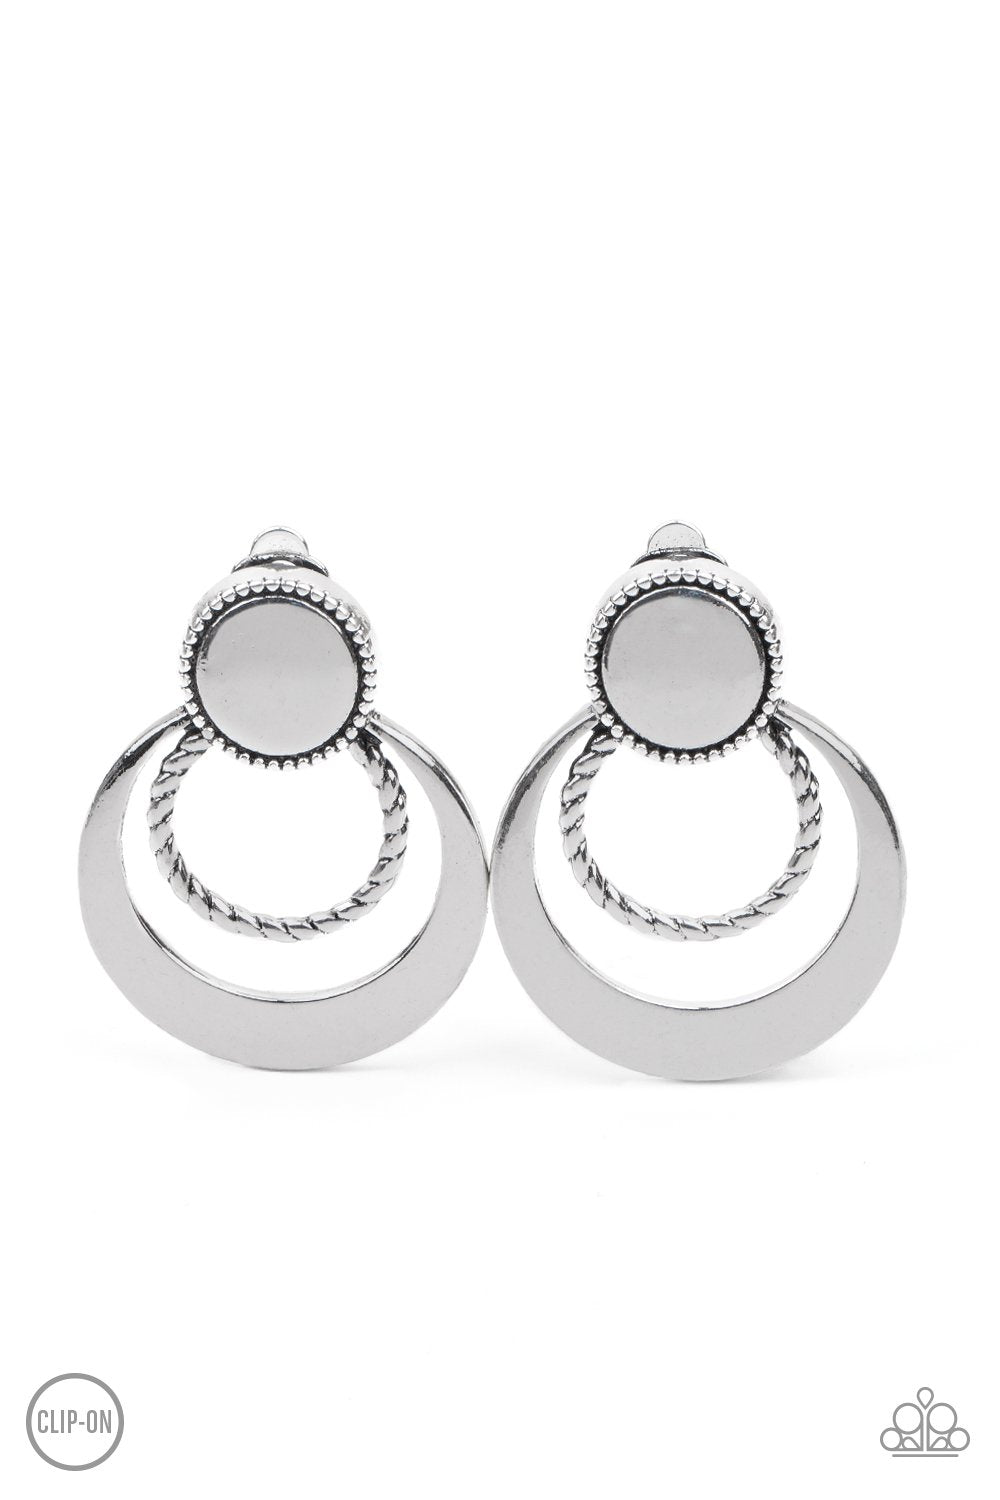 &lt;p&gt;A twisted silver ring and crescent shaped silver frame ripple out from the bottom of a textured silver disc, creating a refined lure. Earring attaches to a standard clip-on fitting. &lt;/p&gt;

&lt;p&gt;&lt;br&gt;&lt;/p&gt;

